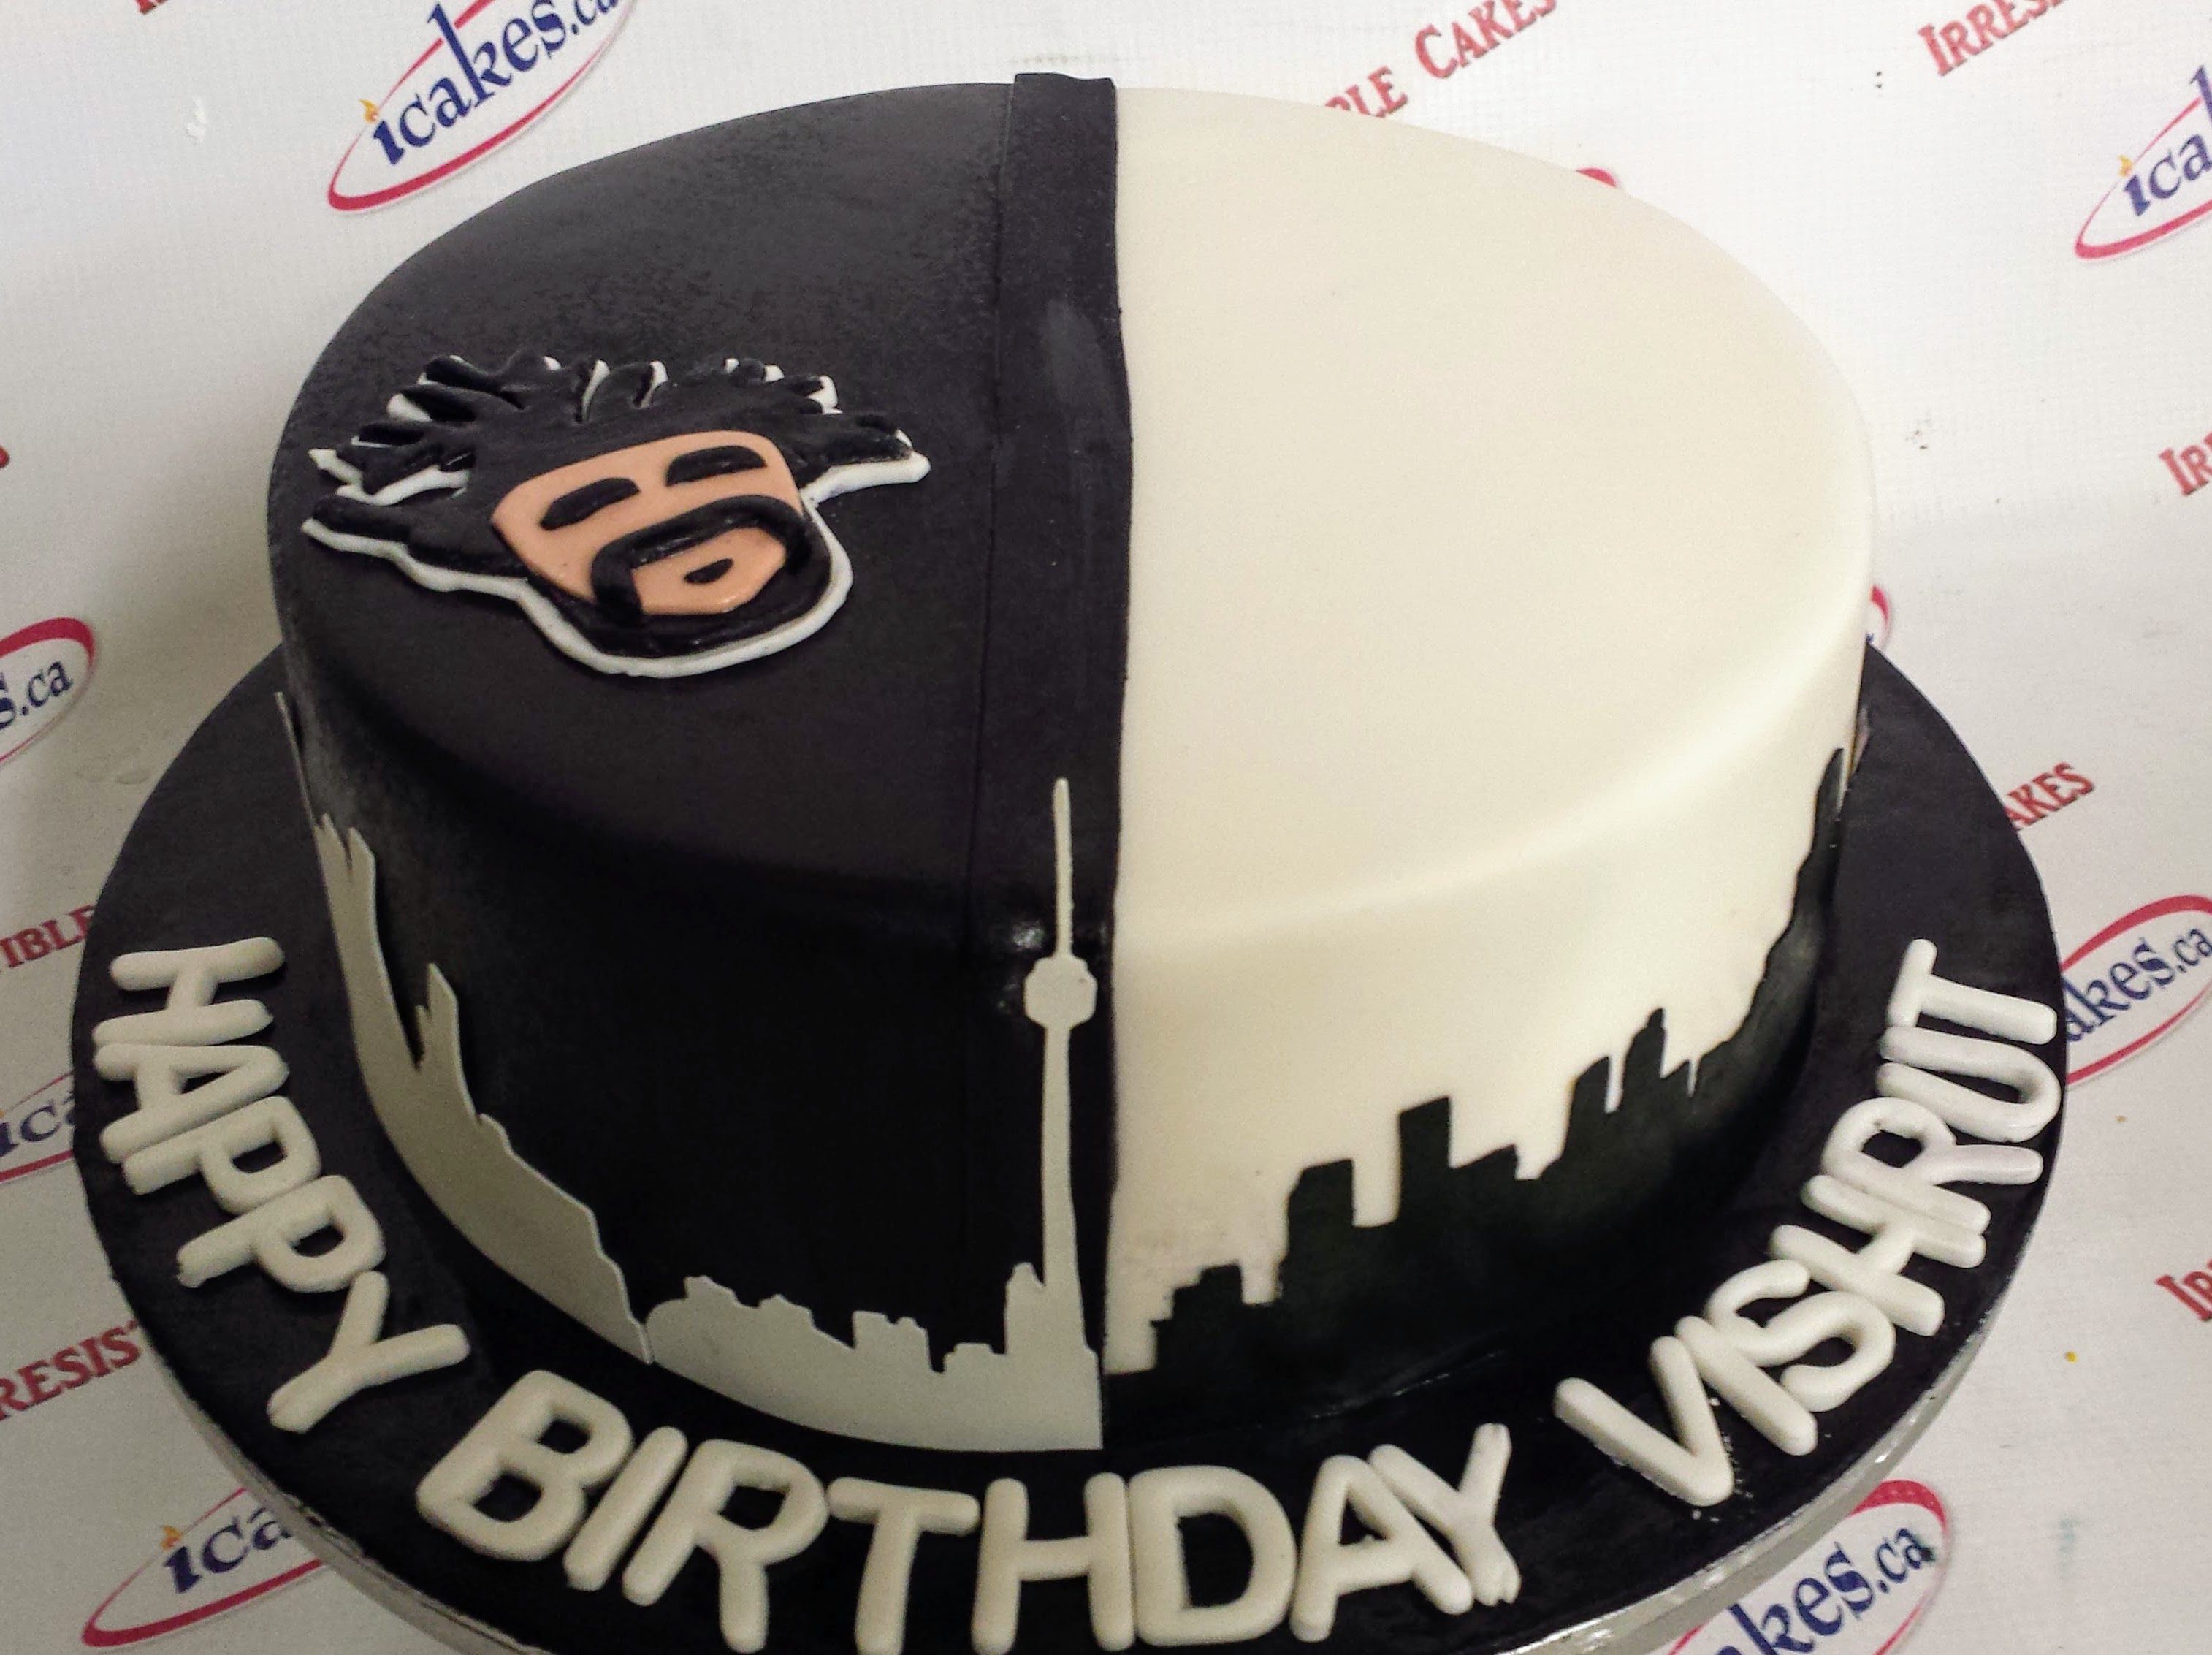 The Weeknd, Toronto City Silhouette, Black And White Birthday Cake For Man/Woman/Boy/Girl